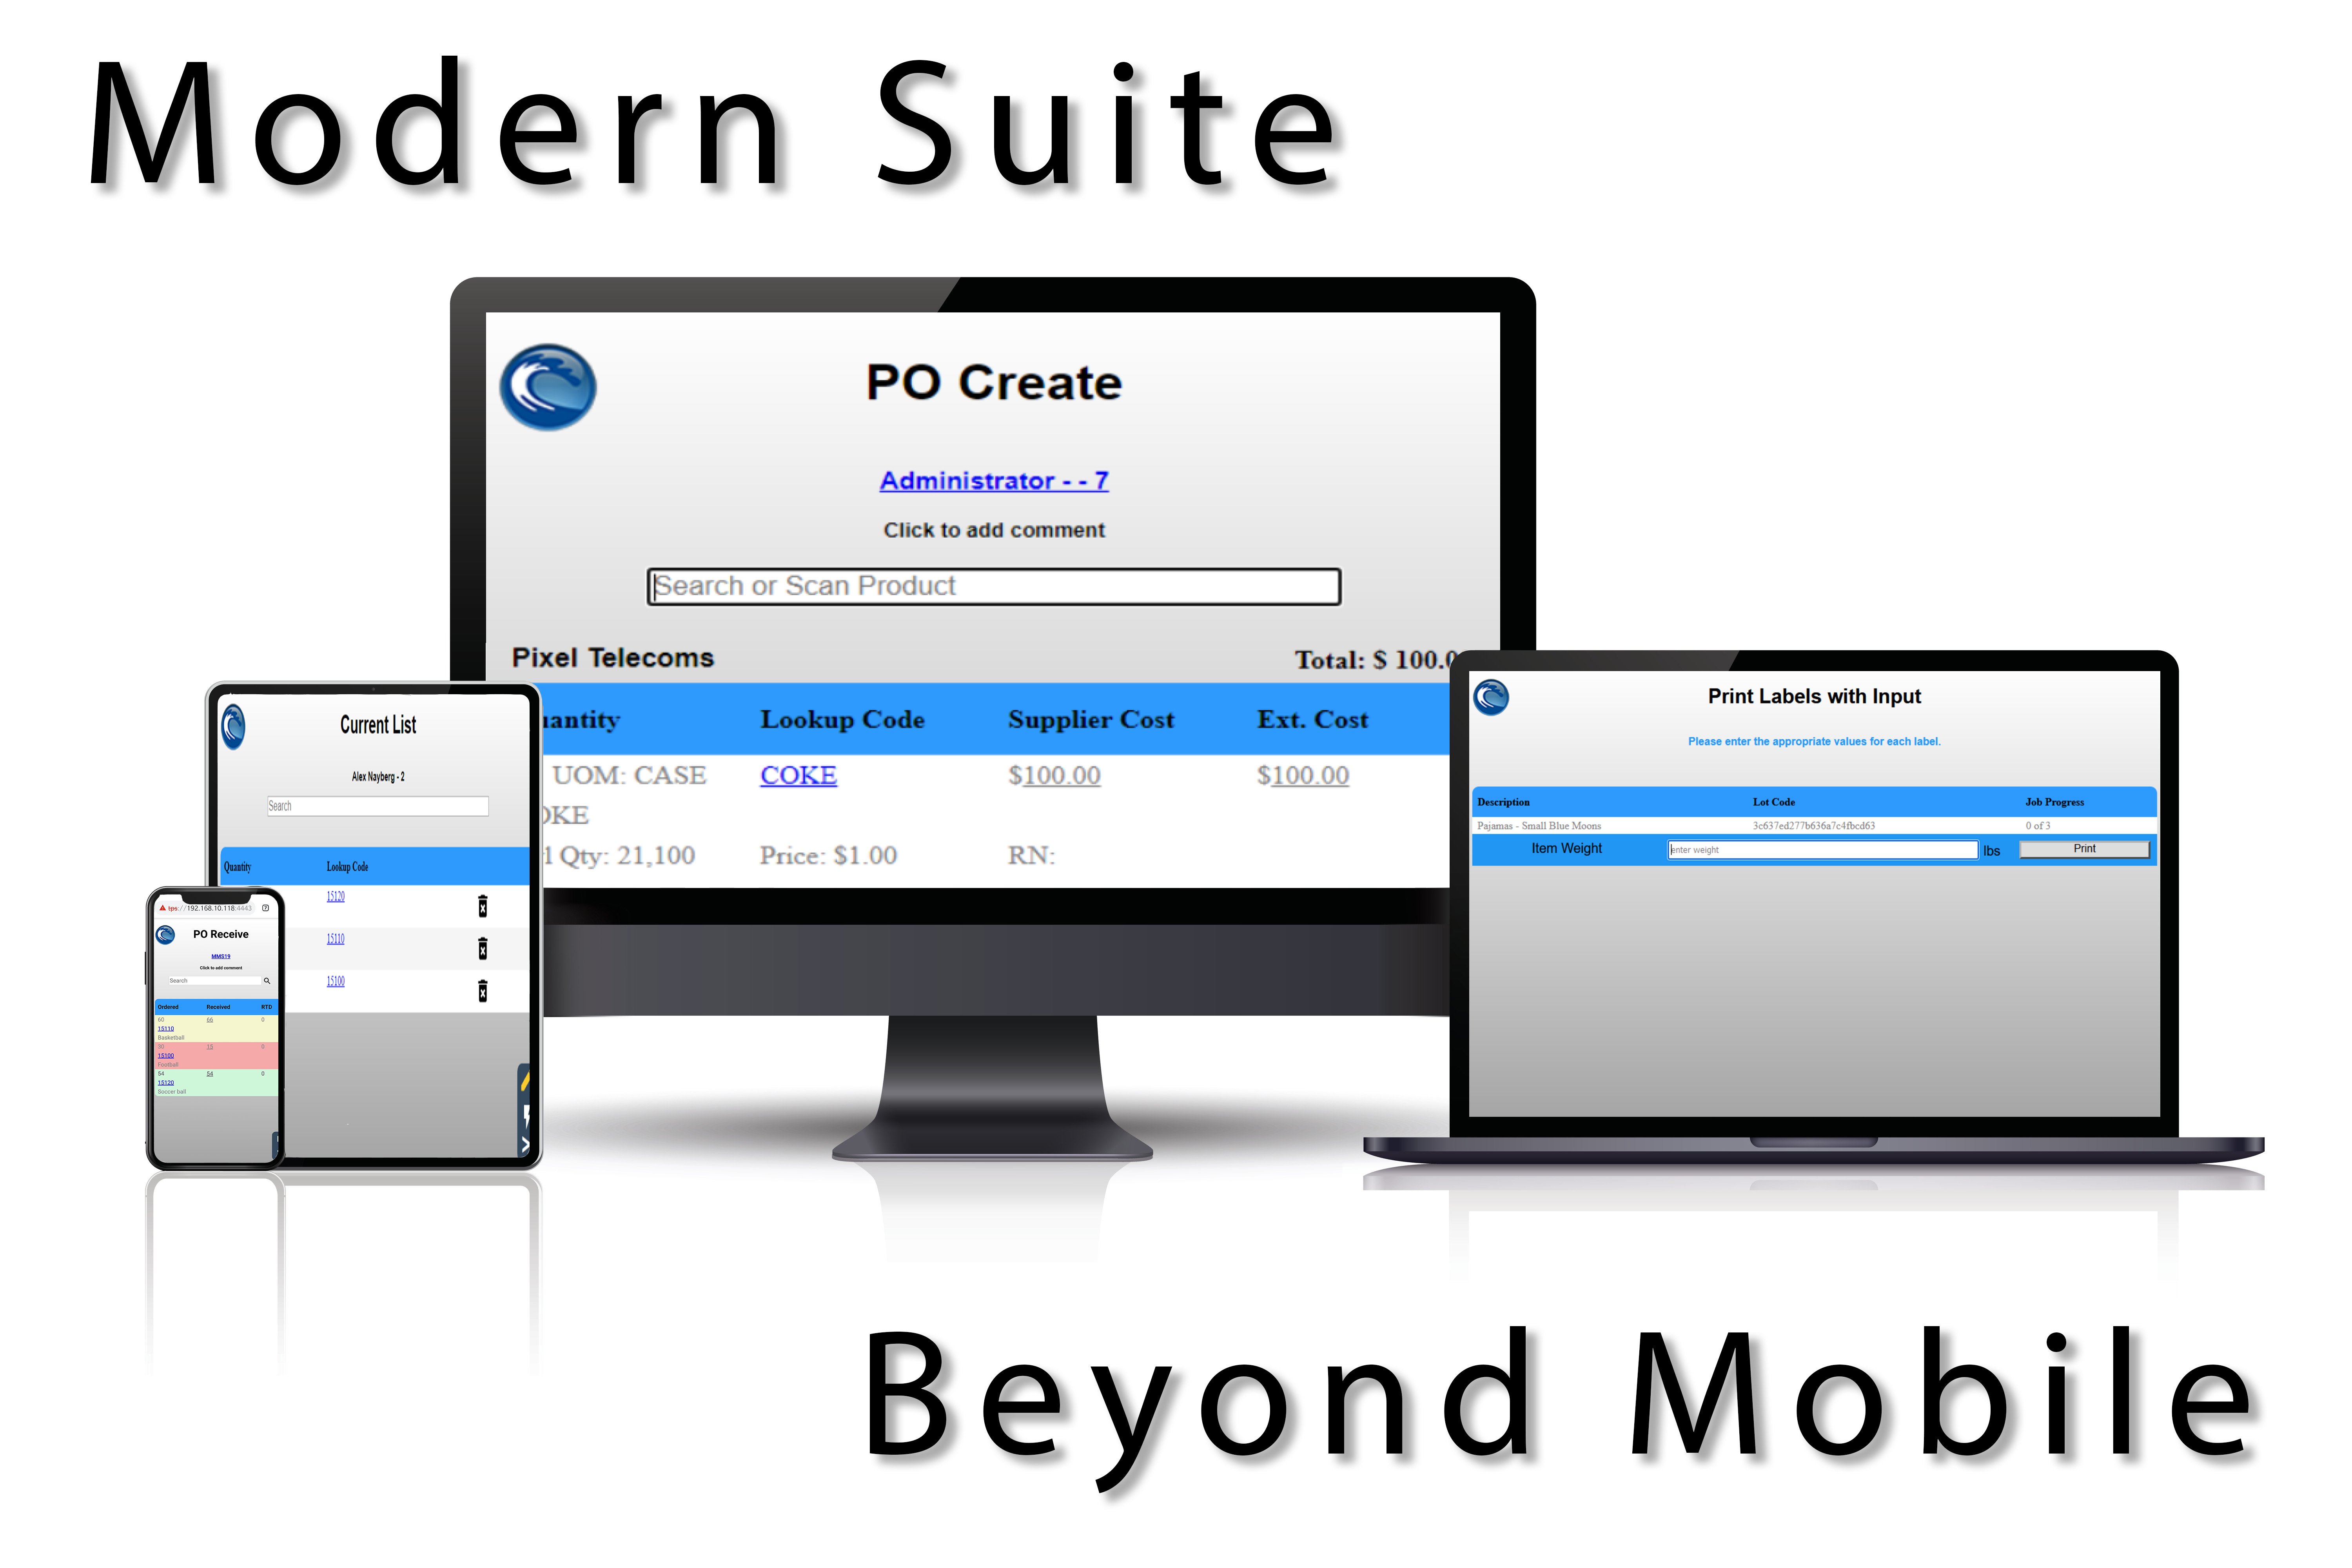 Modern Suite is Beyond Mobile and Device Agnostic